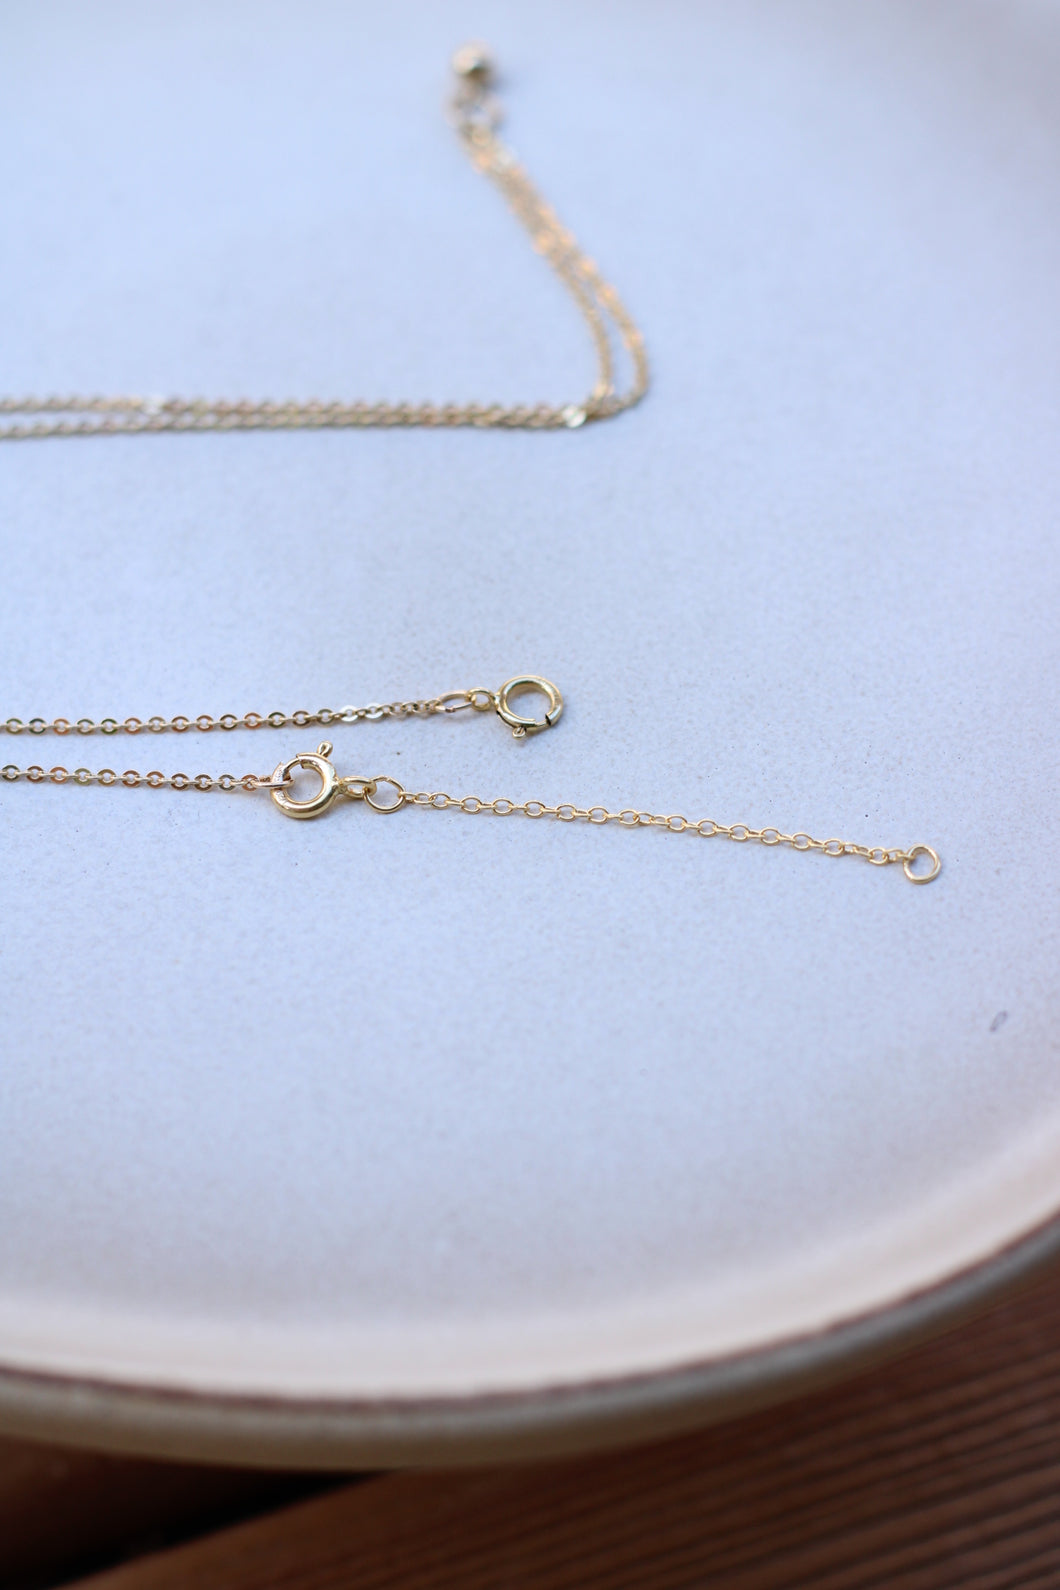 Gold Filled Chain Extender